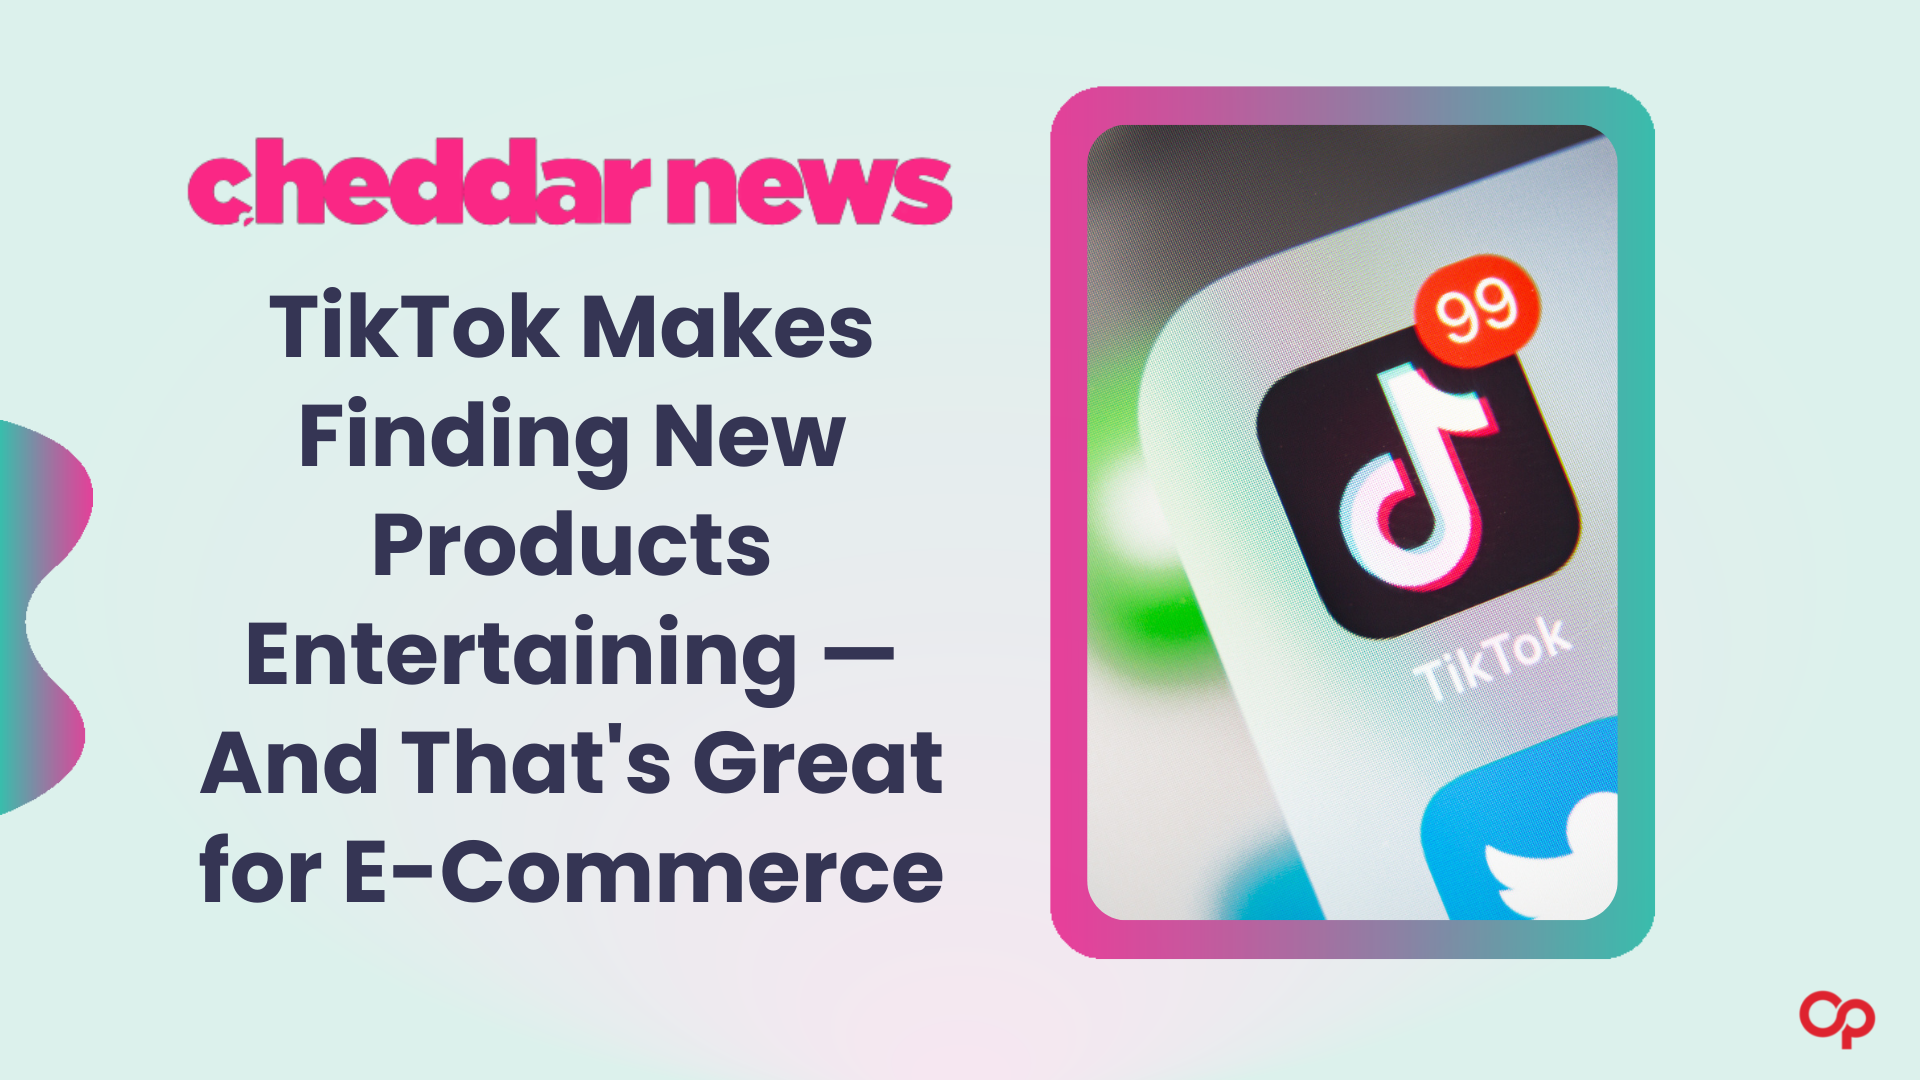 TikTok Makes Finding New Products Entertaining — And That's Great for E-Commerce